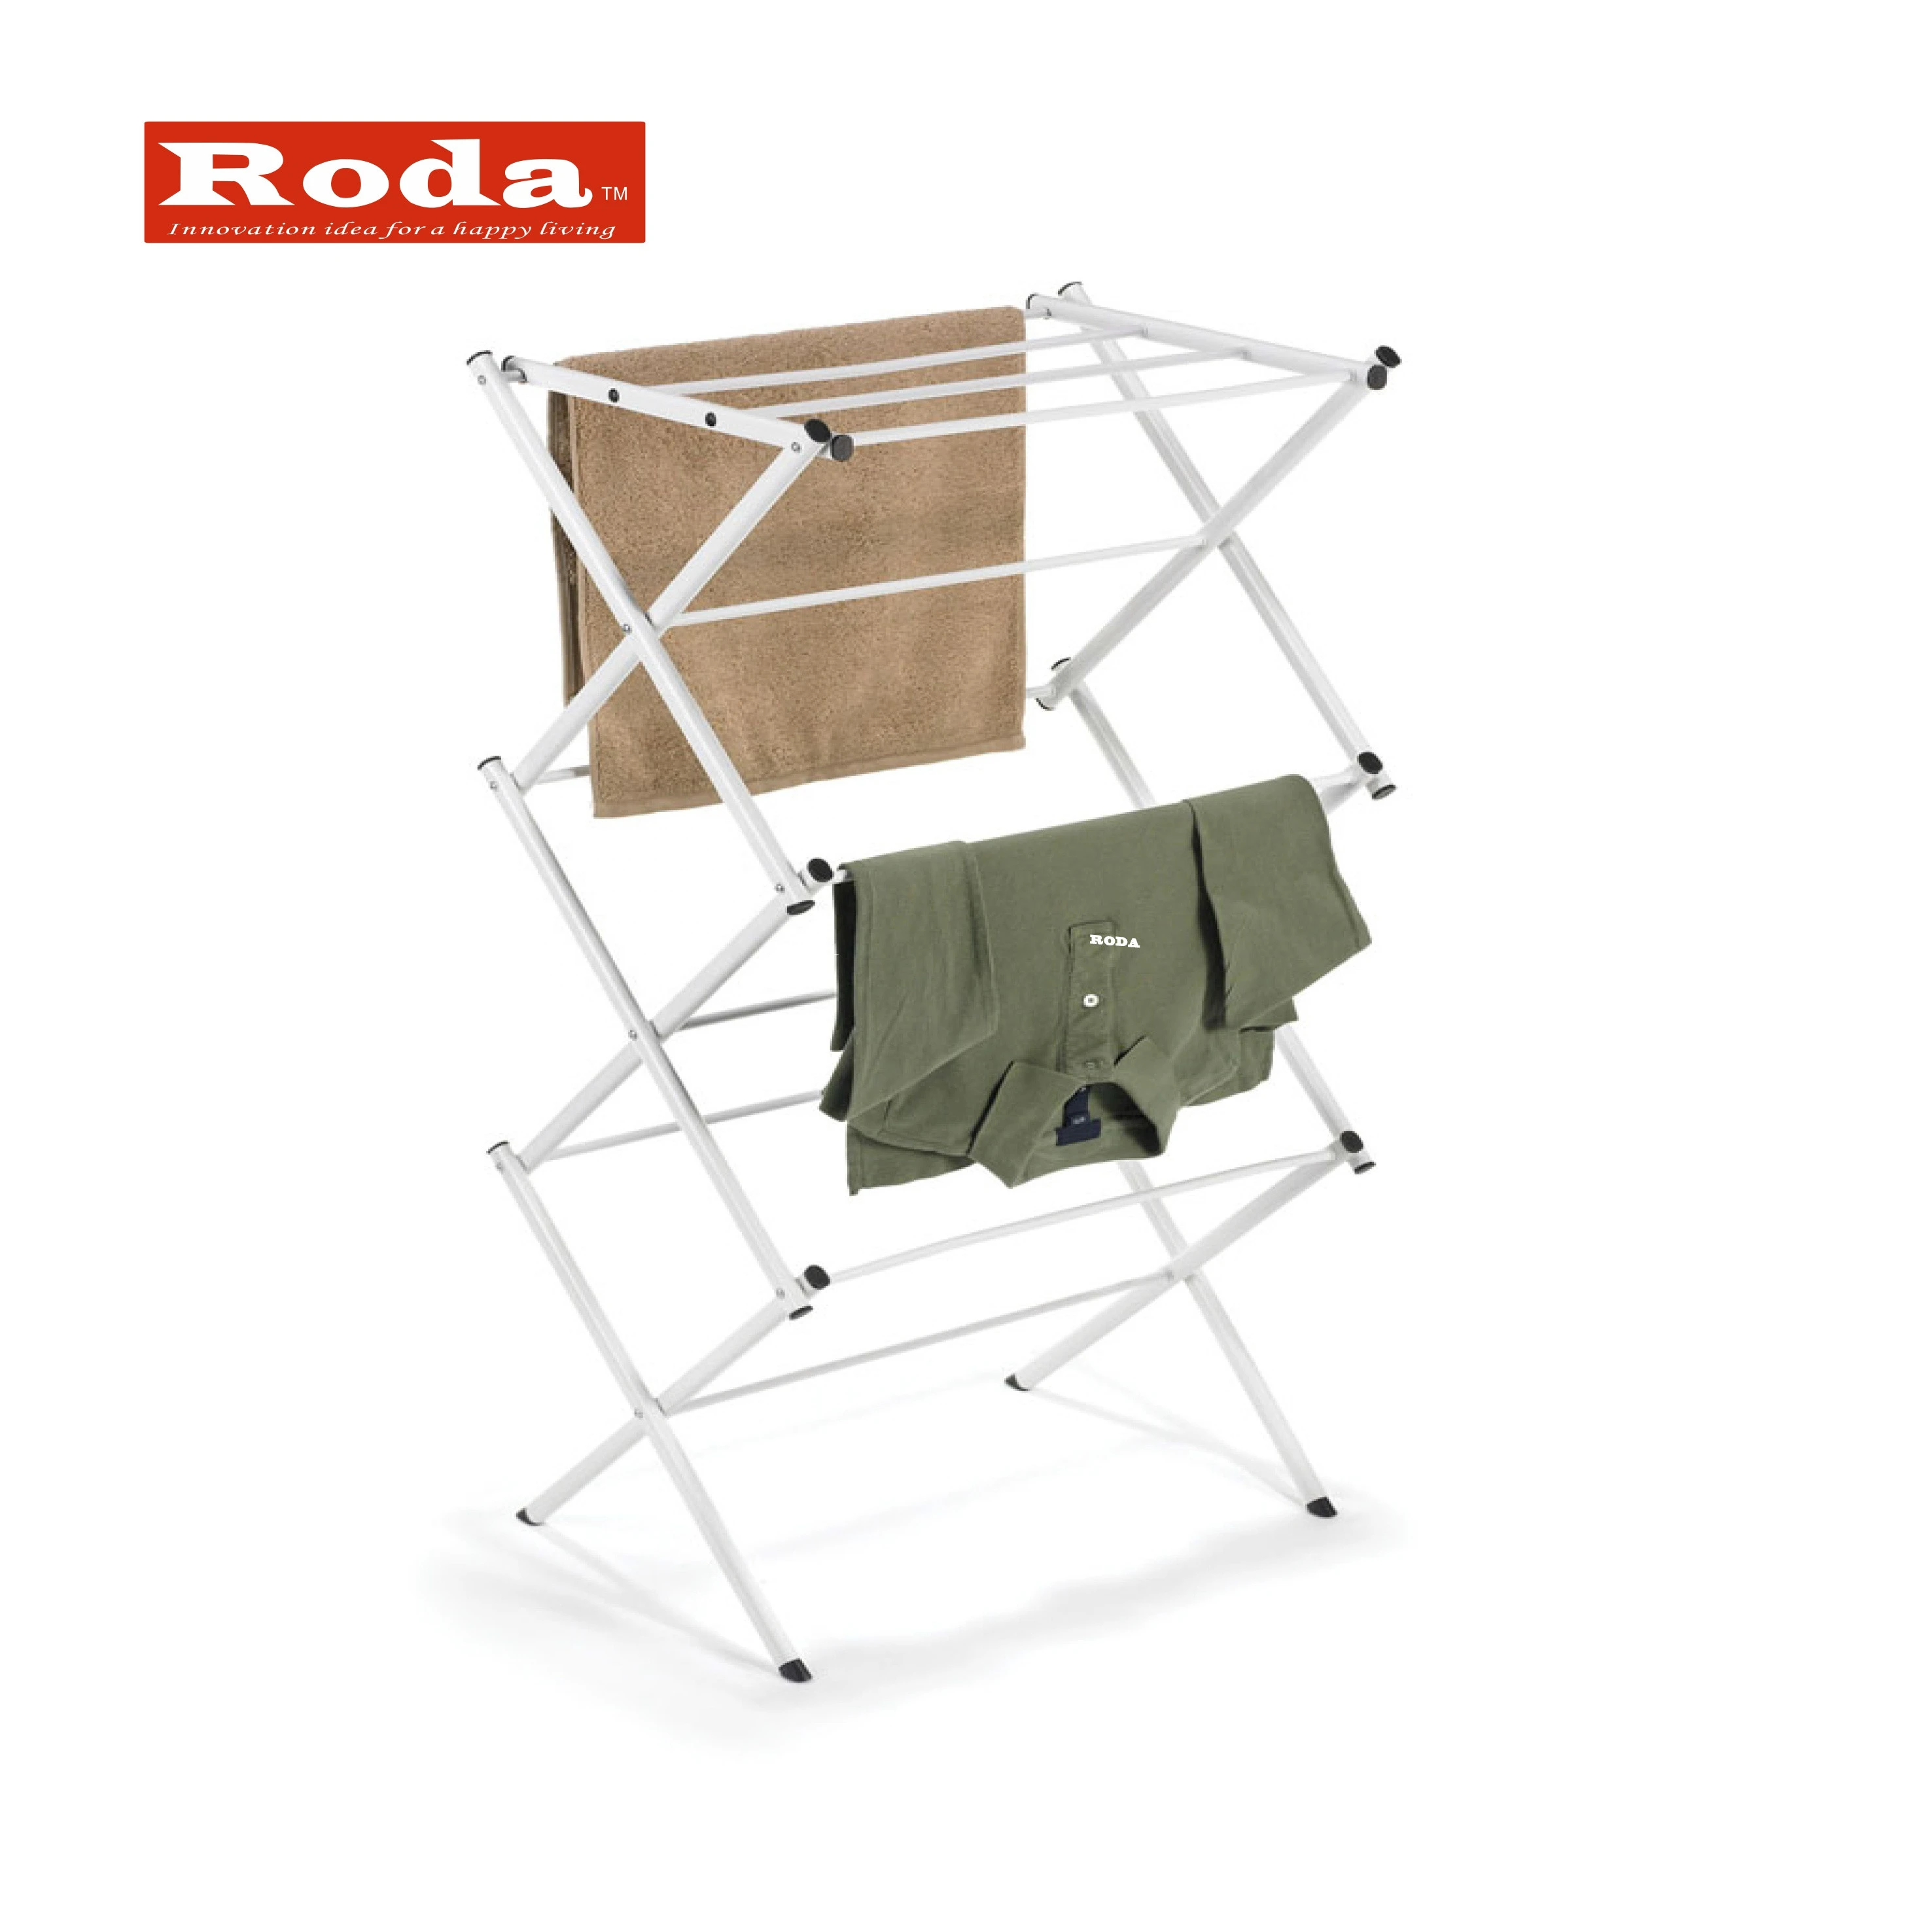 factory price compact cloth drying rack foldable clothes drying rack